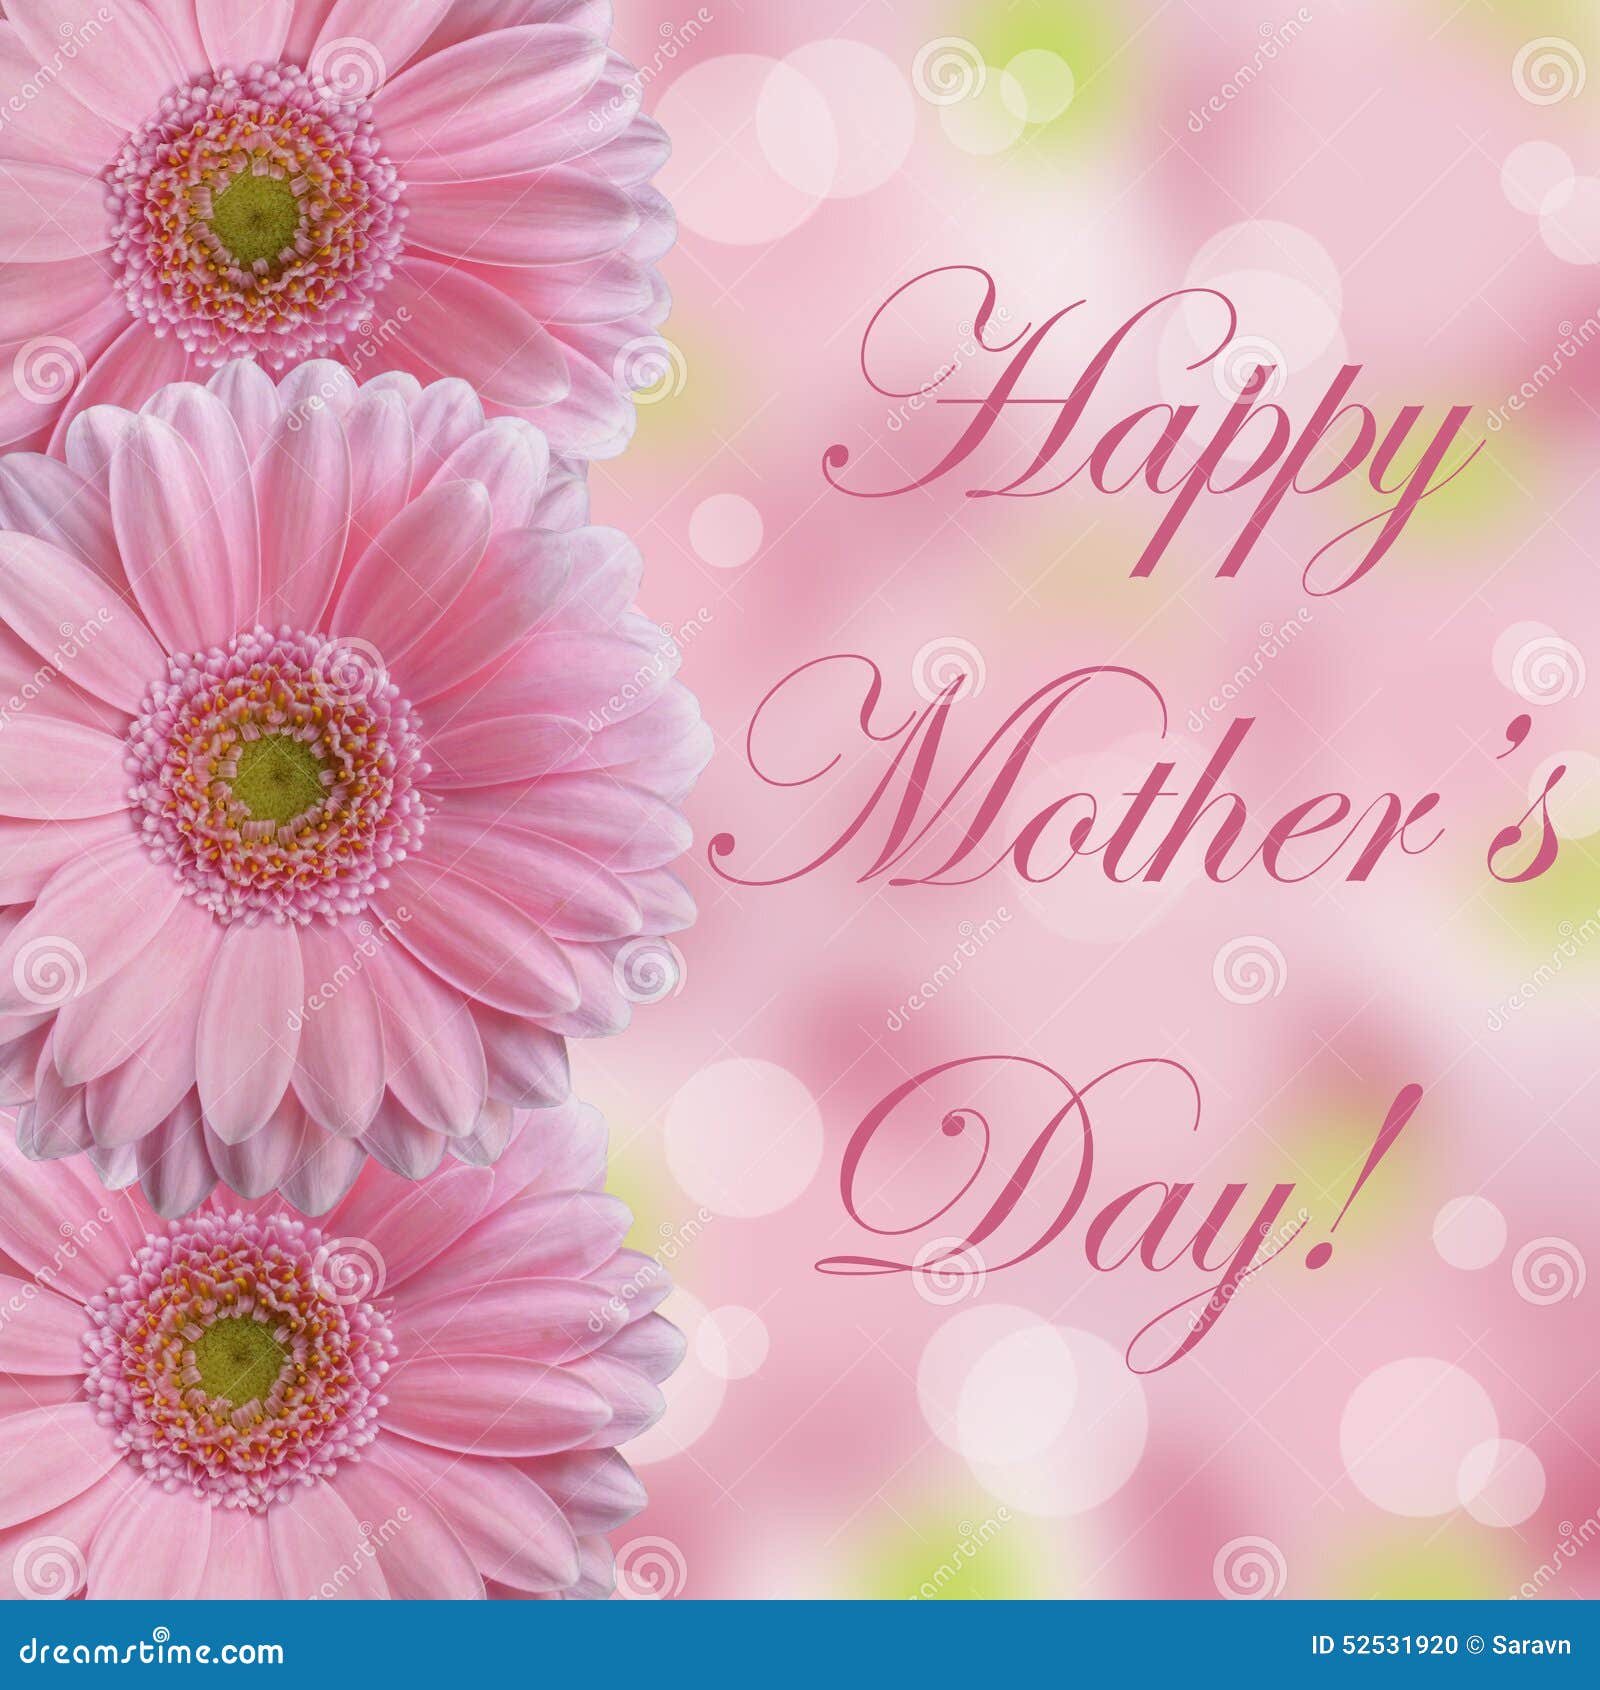 happy-mother-s-day-card-with-three-soft-light-pink-gerbera-daisy